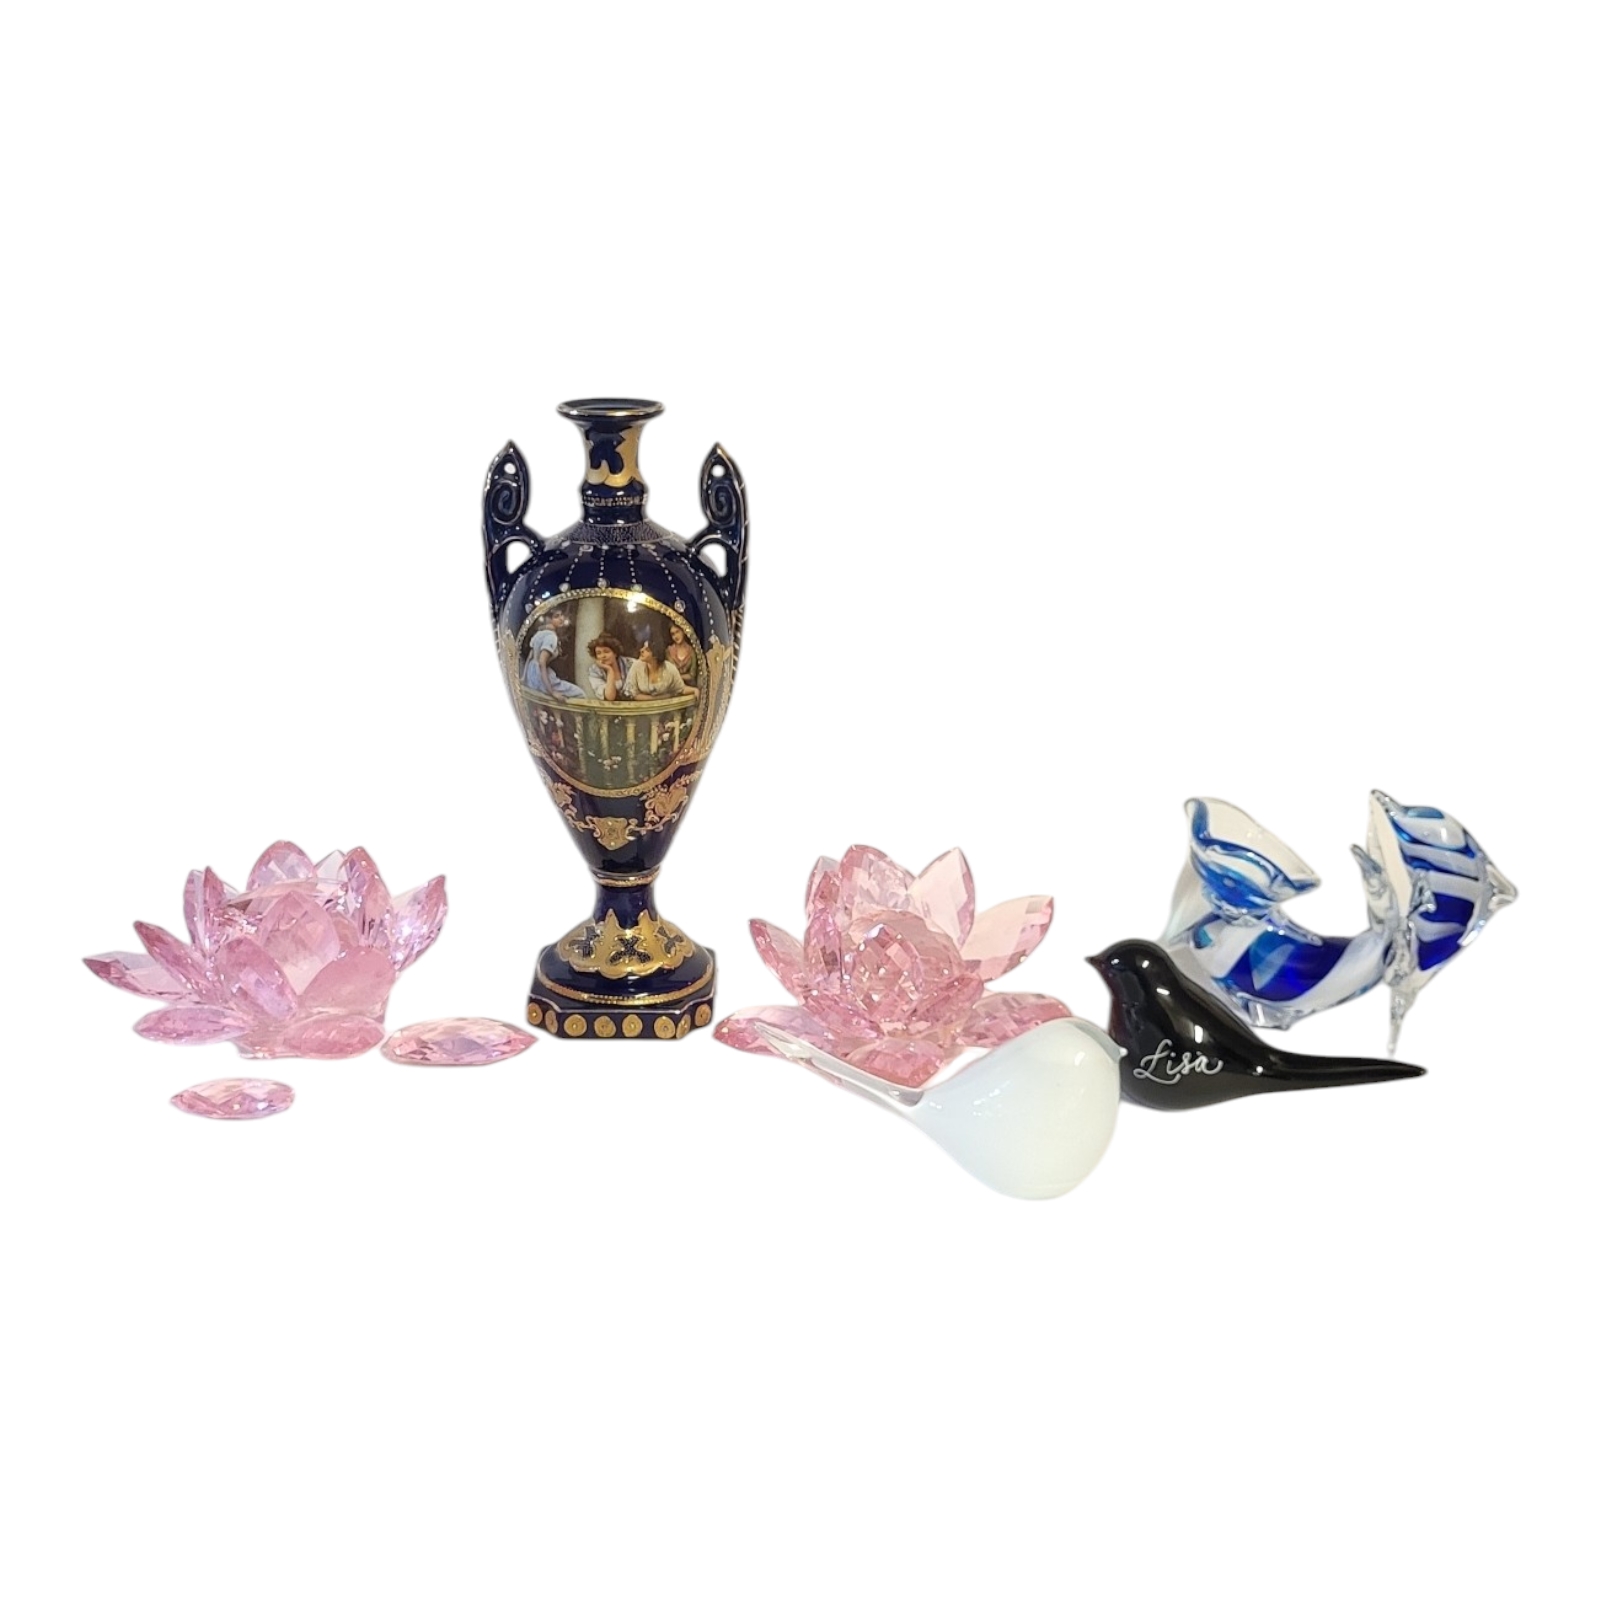 A PAIR OF SWAROVSKI STYLE PINK CRYSTAL GLASS FLOWERS Along with a Murano style posy holder formed as